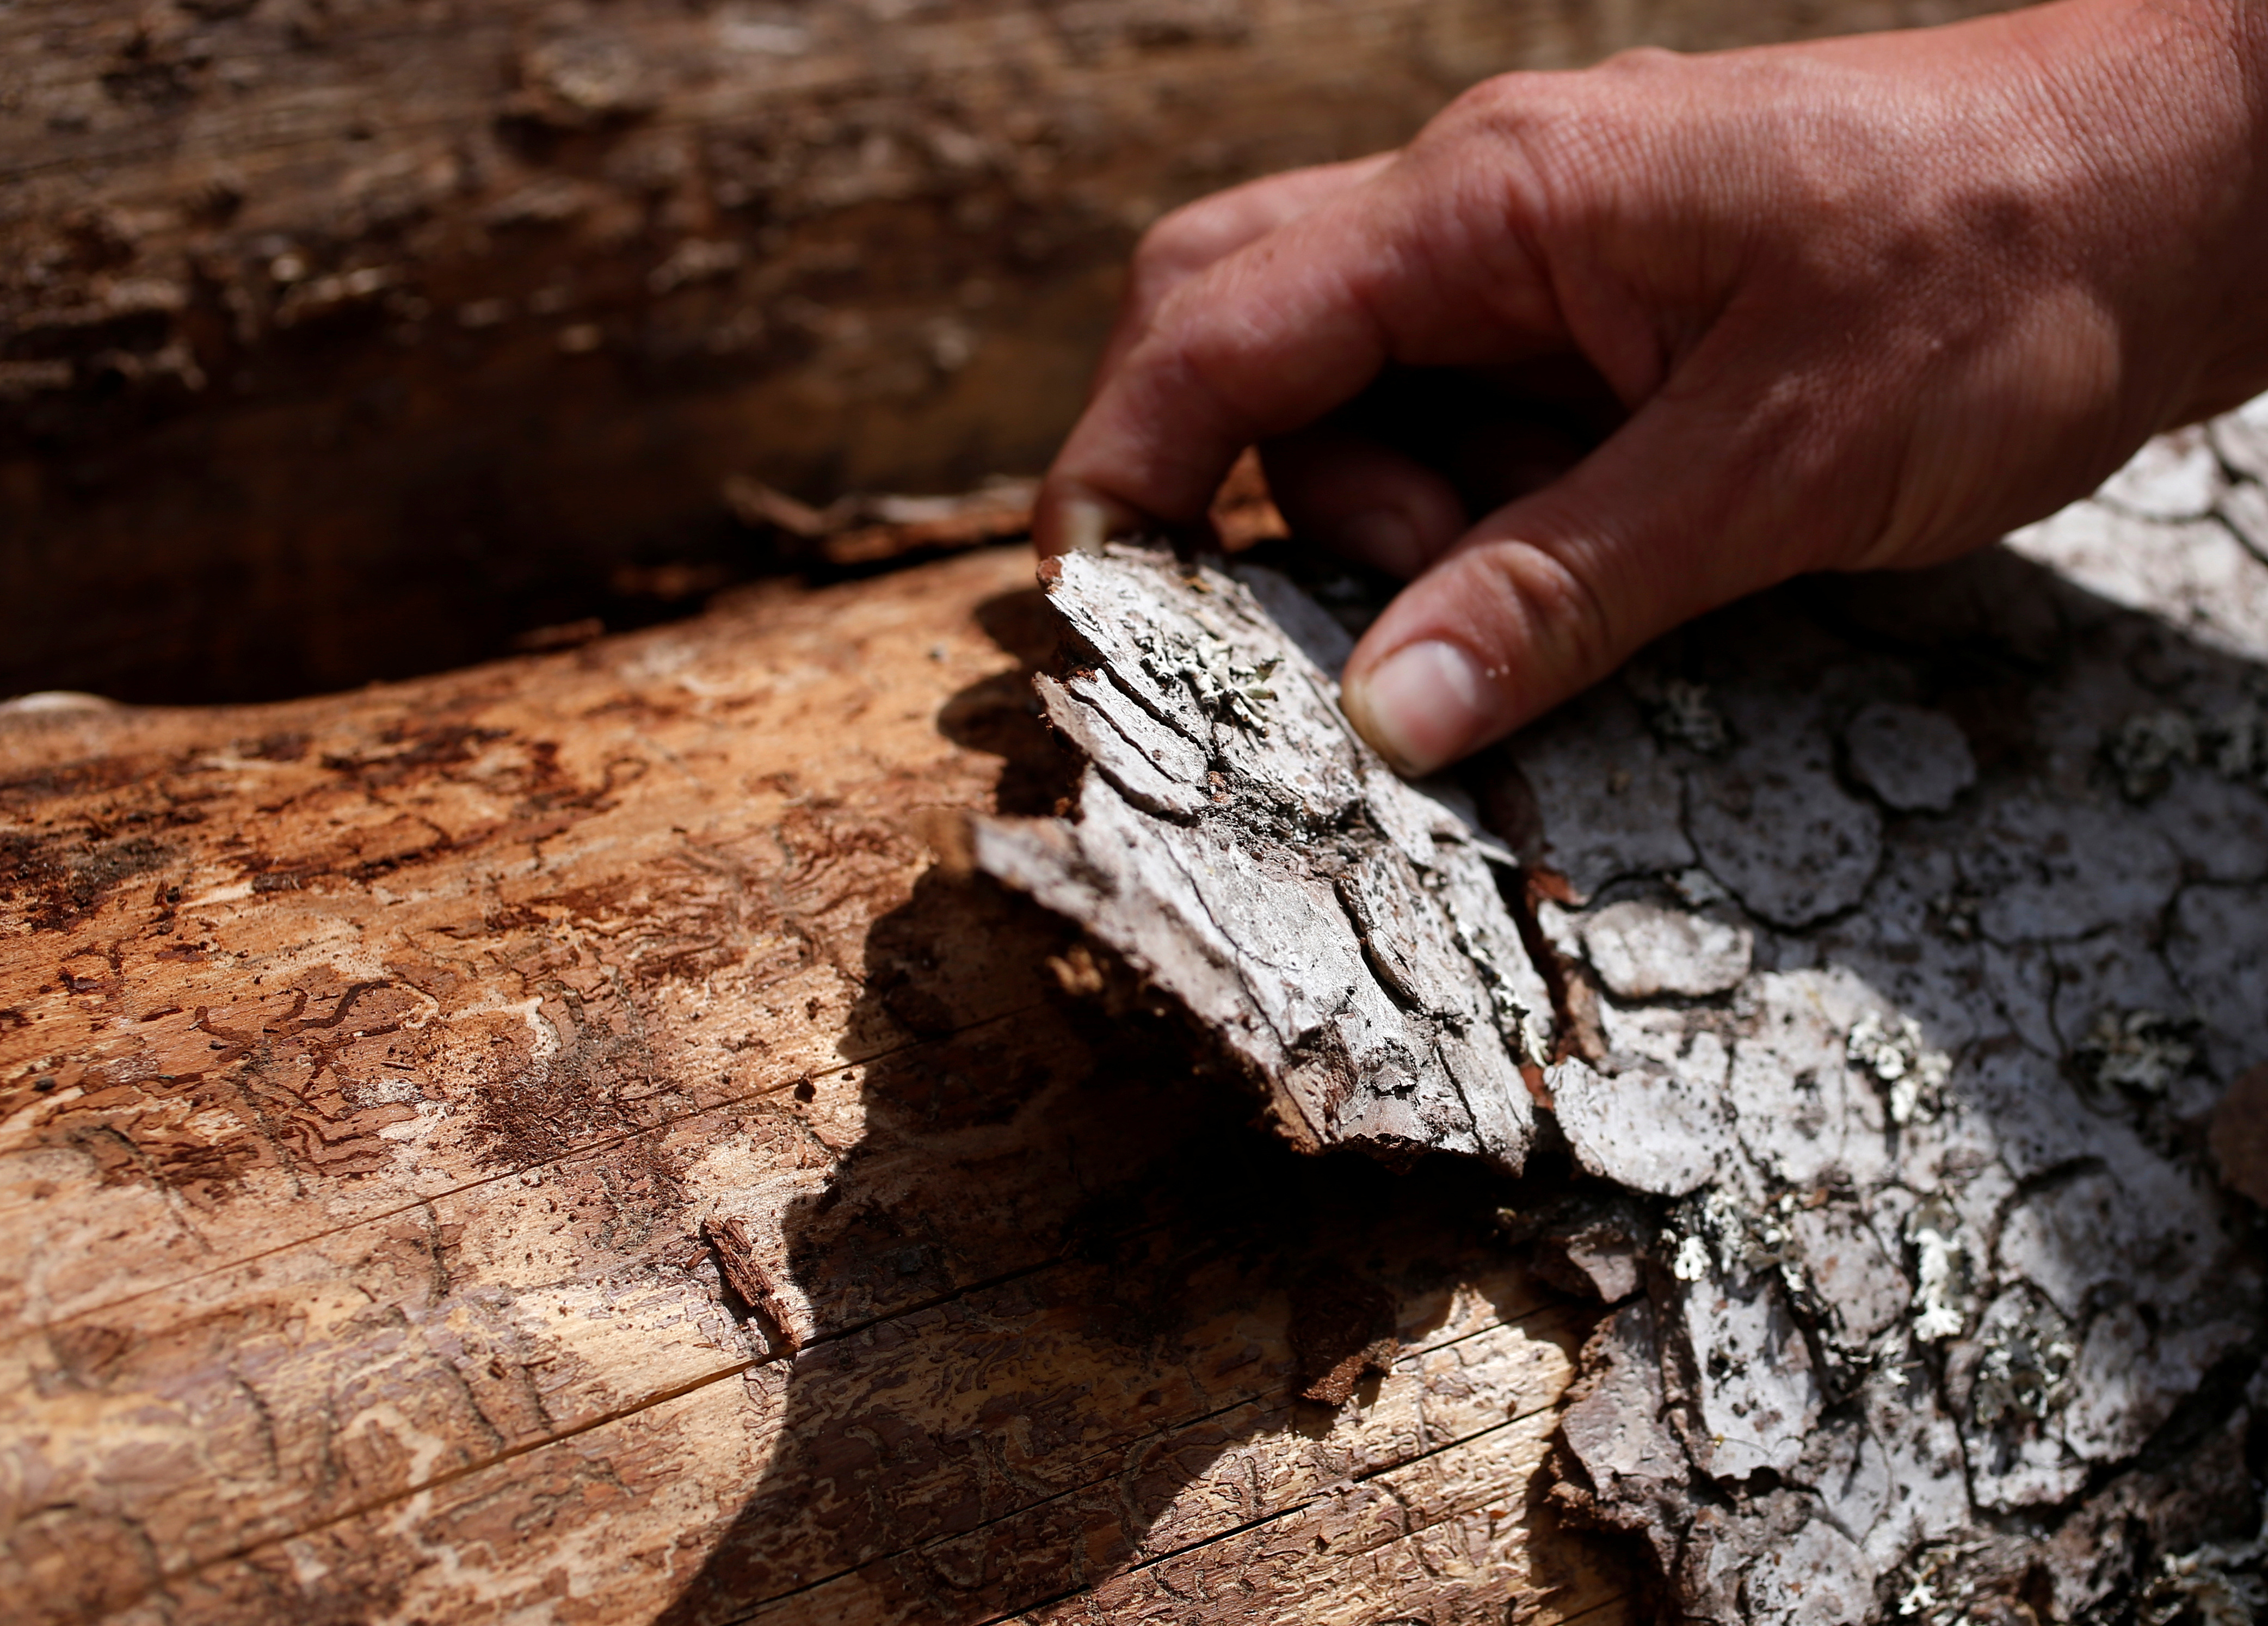 An employee of the ONF (French national forests office) looks at the trunk of a tree marked by traces of bark beetles near Masevaux